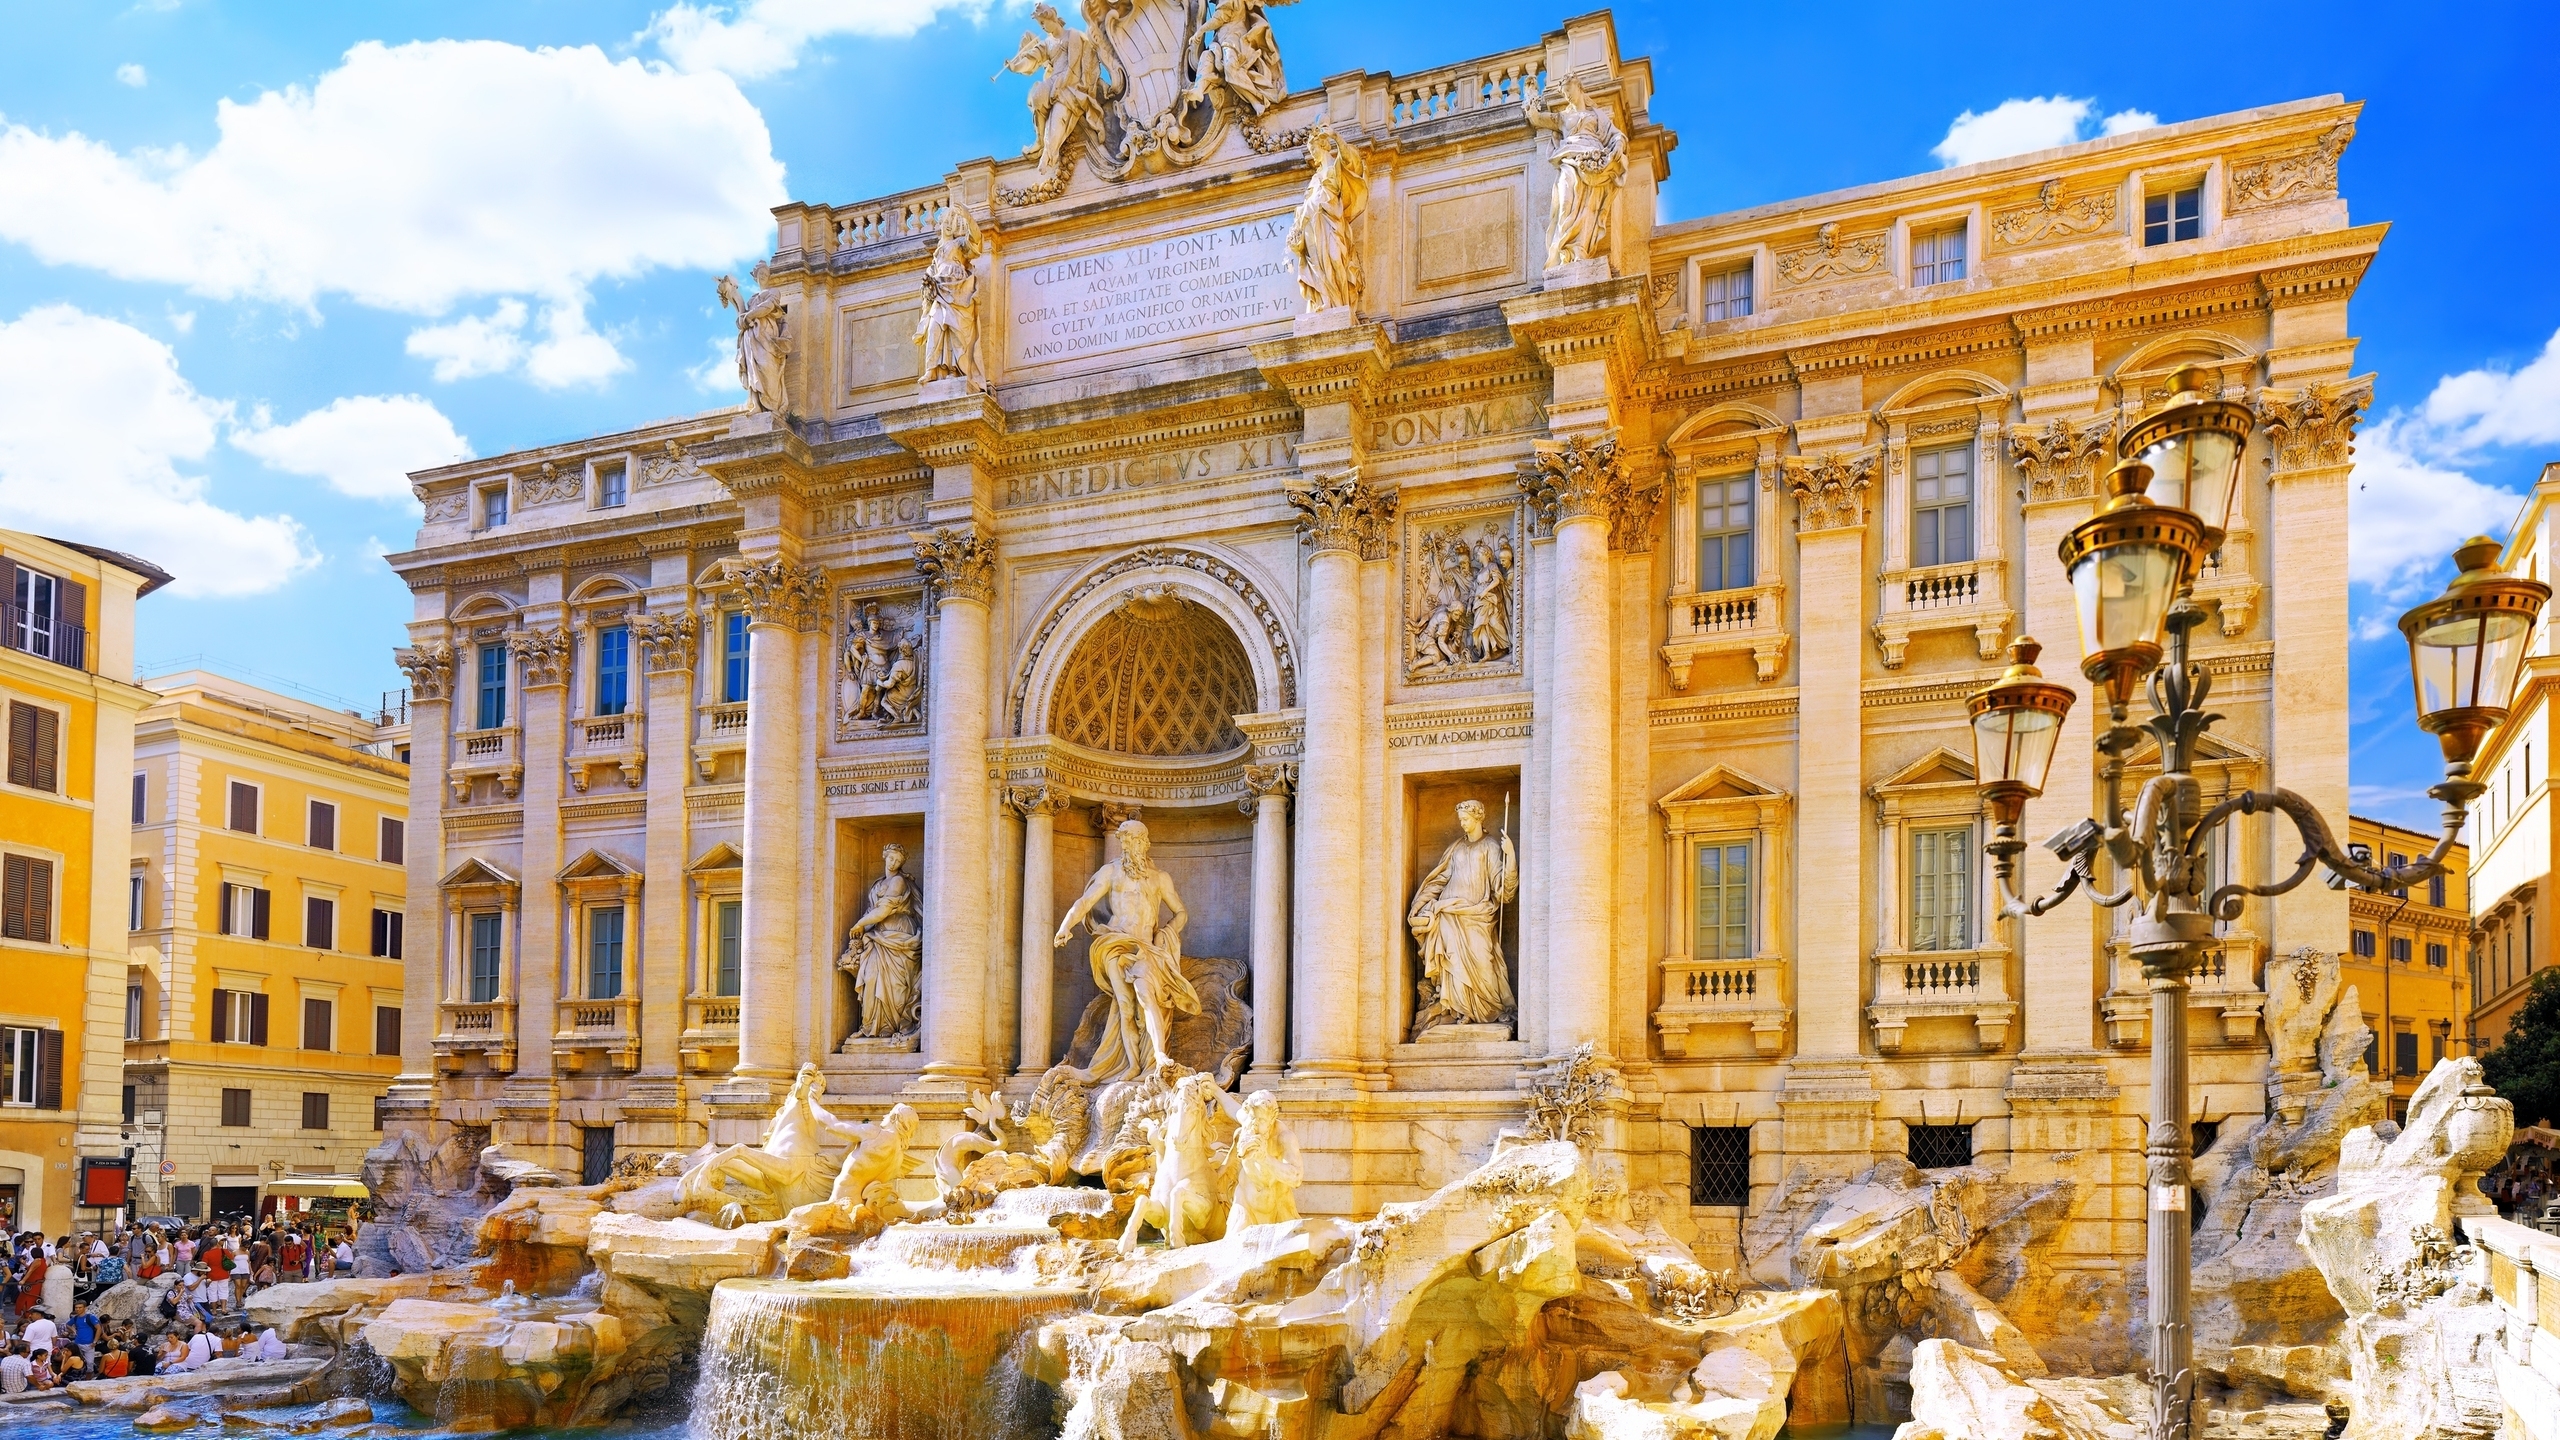 The Trevi Fountain for 2560x1440 HDTV resolution